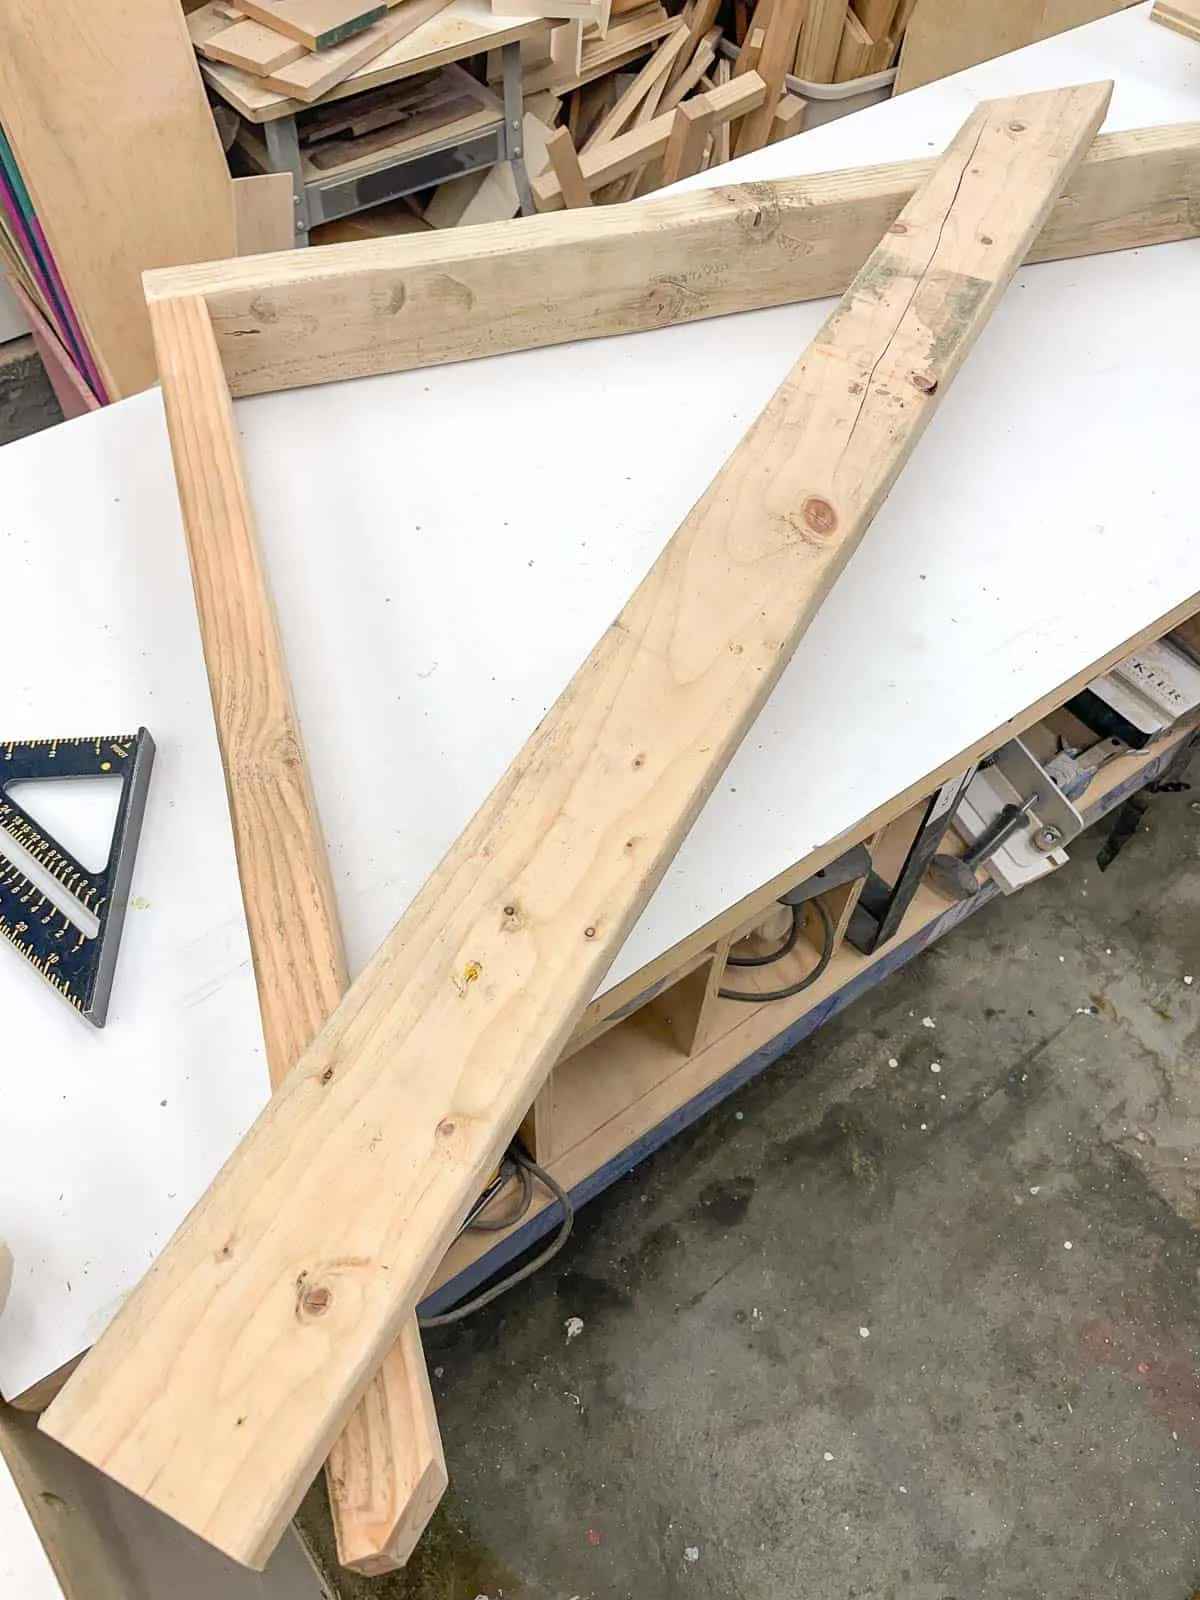 DIY bike rack frame with cross support on top